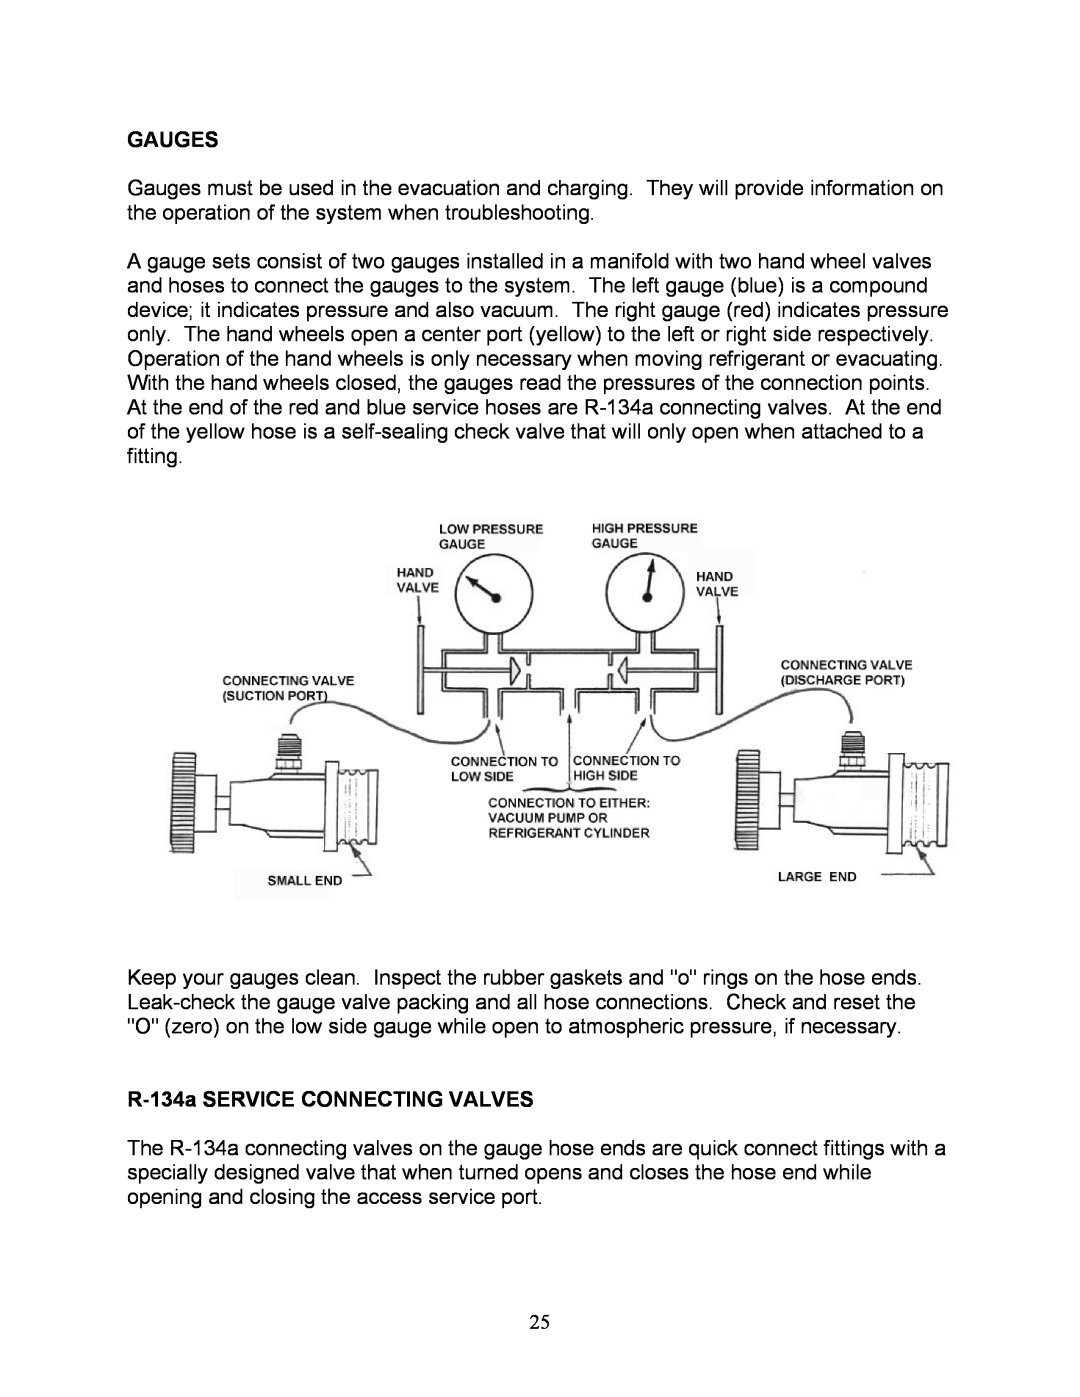 Sea Frost DC 5000 installation instructions Gauges, R-134aSERVICE CONNECTING VALVES 